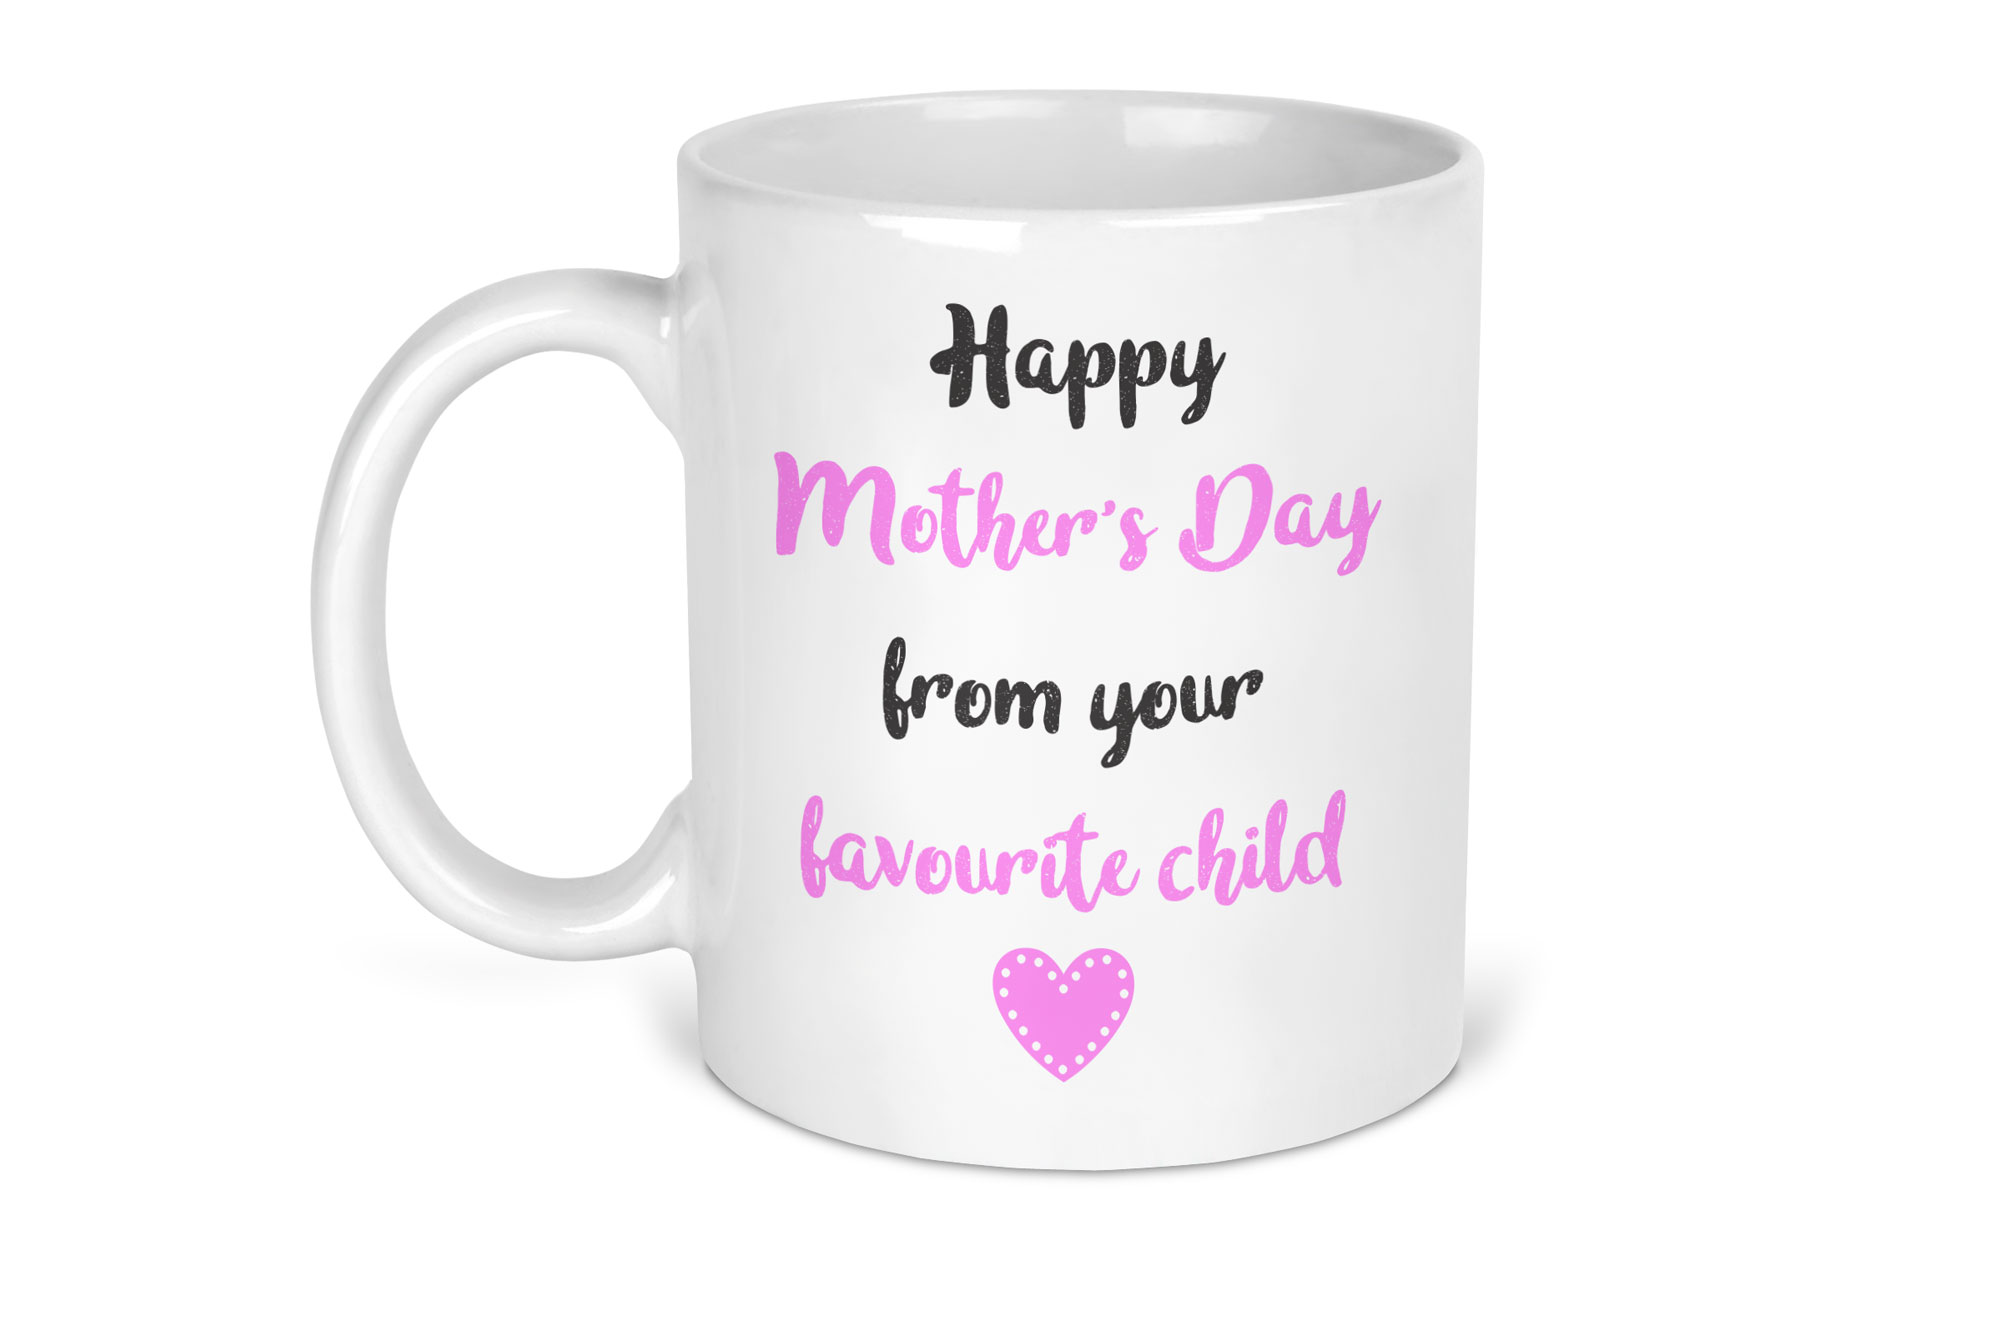 Happy Mothers day from your favourite child mug